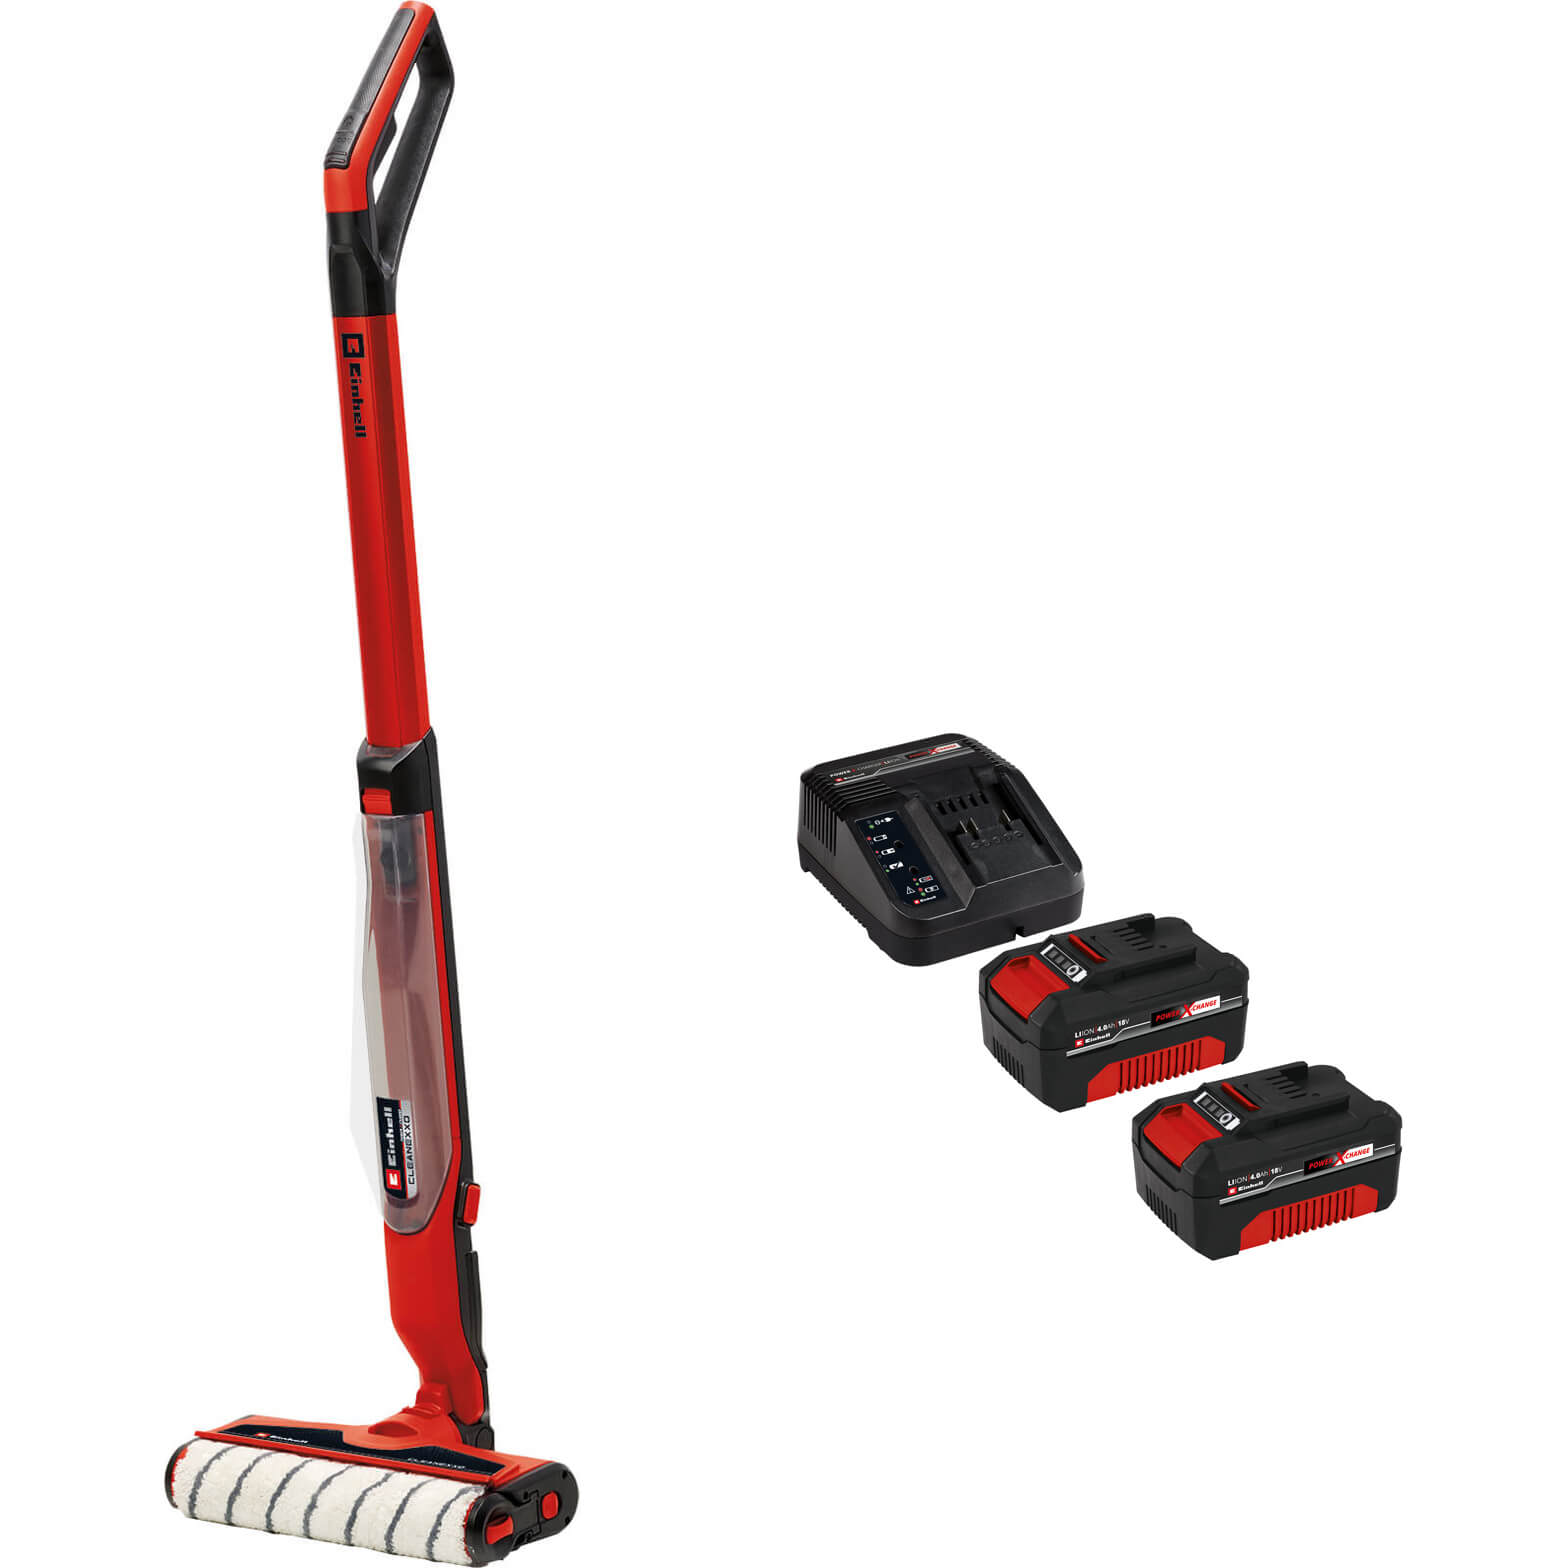 Einhell CLEANEXXO 18v Cordless Hard Floor Cleaner 2 x 4ah Li-ion Charger